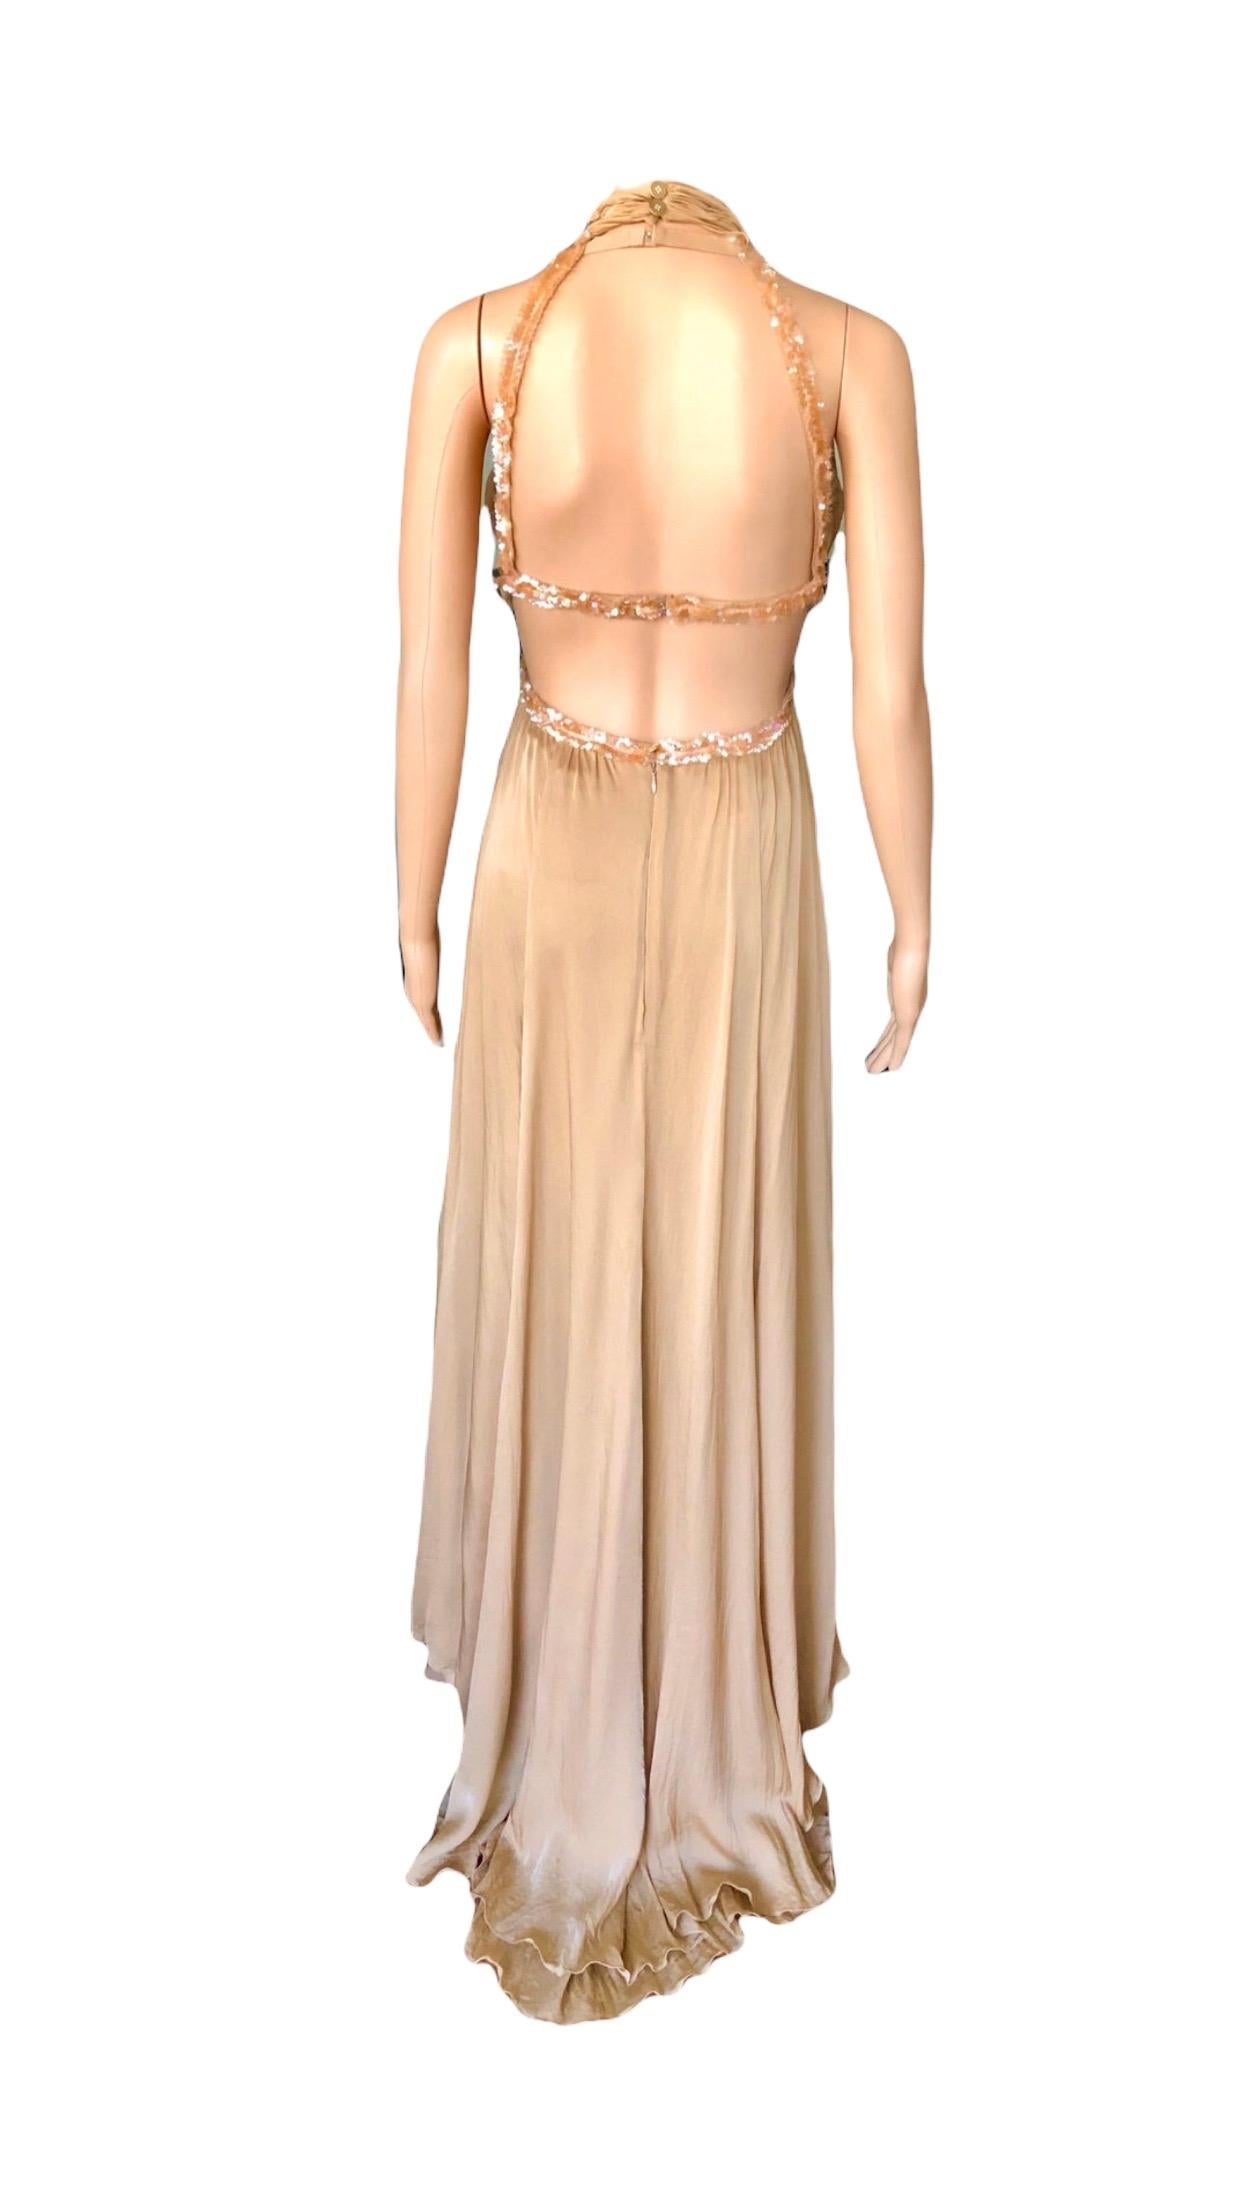 Chanel S/S 2003 Embellished Cut-Out Plunging Open Back Evening Dress Gown For Sale 5